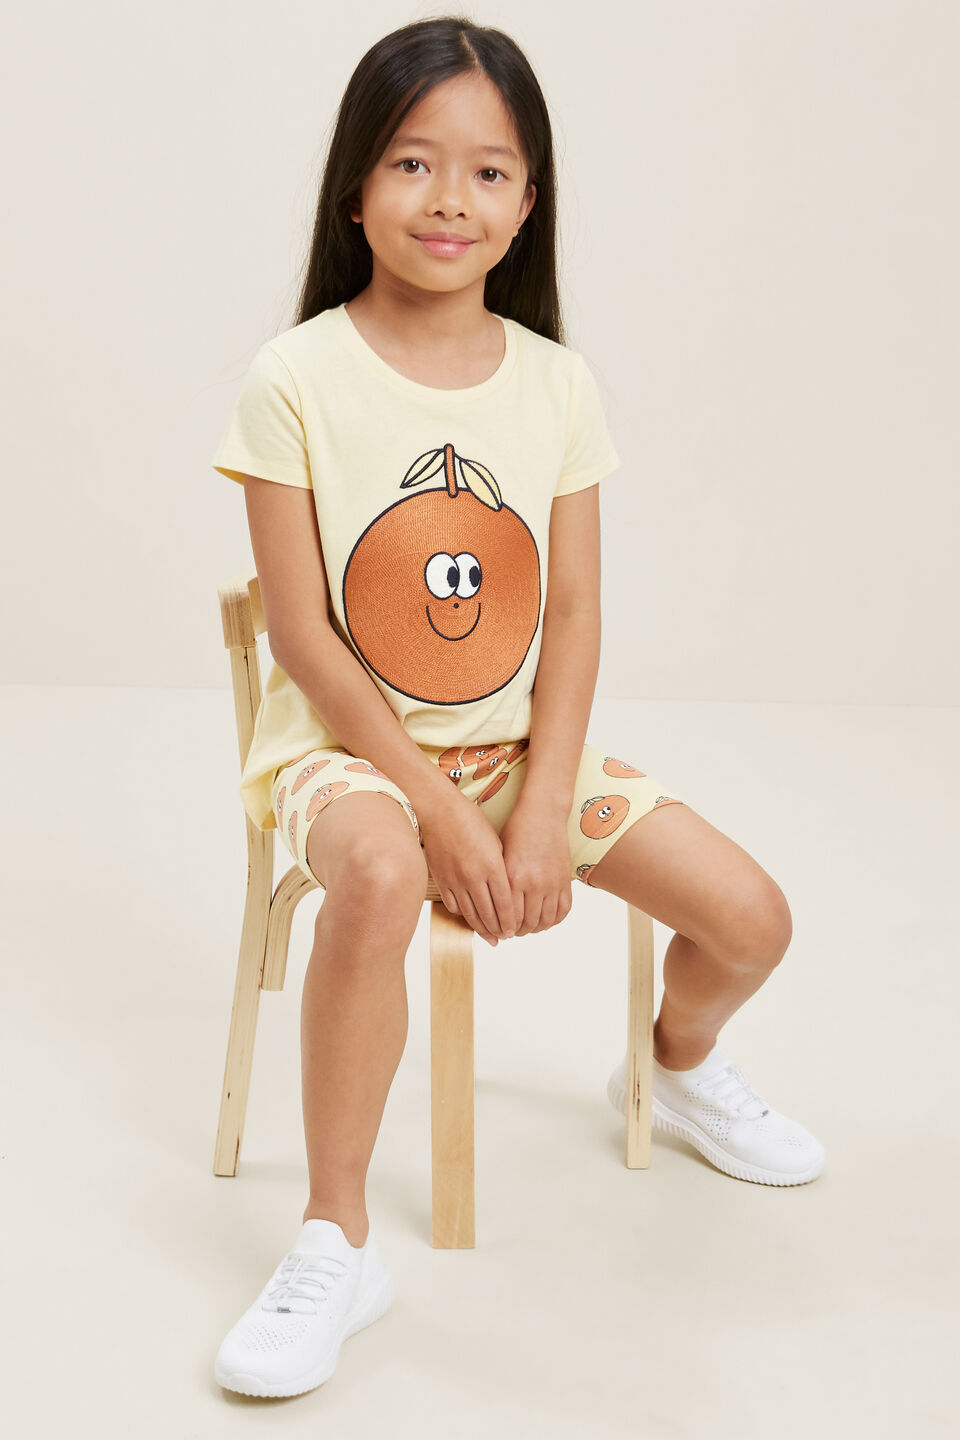 Orange Embroidered Tee  Buttercup